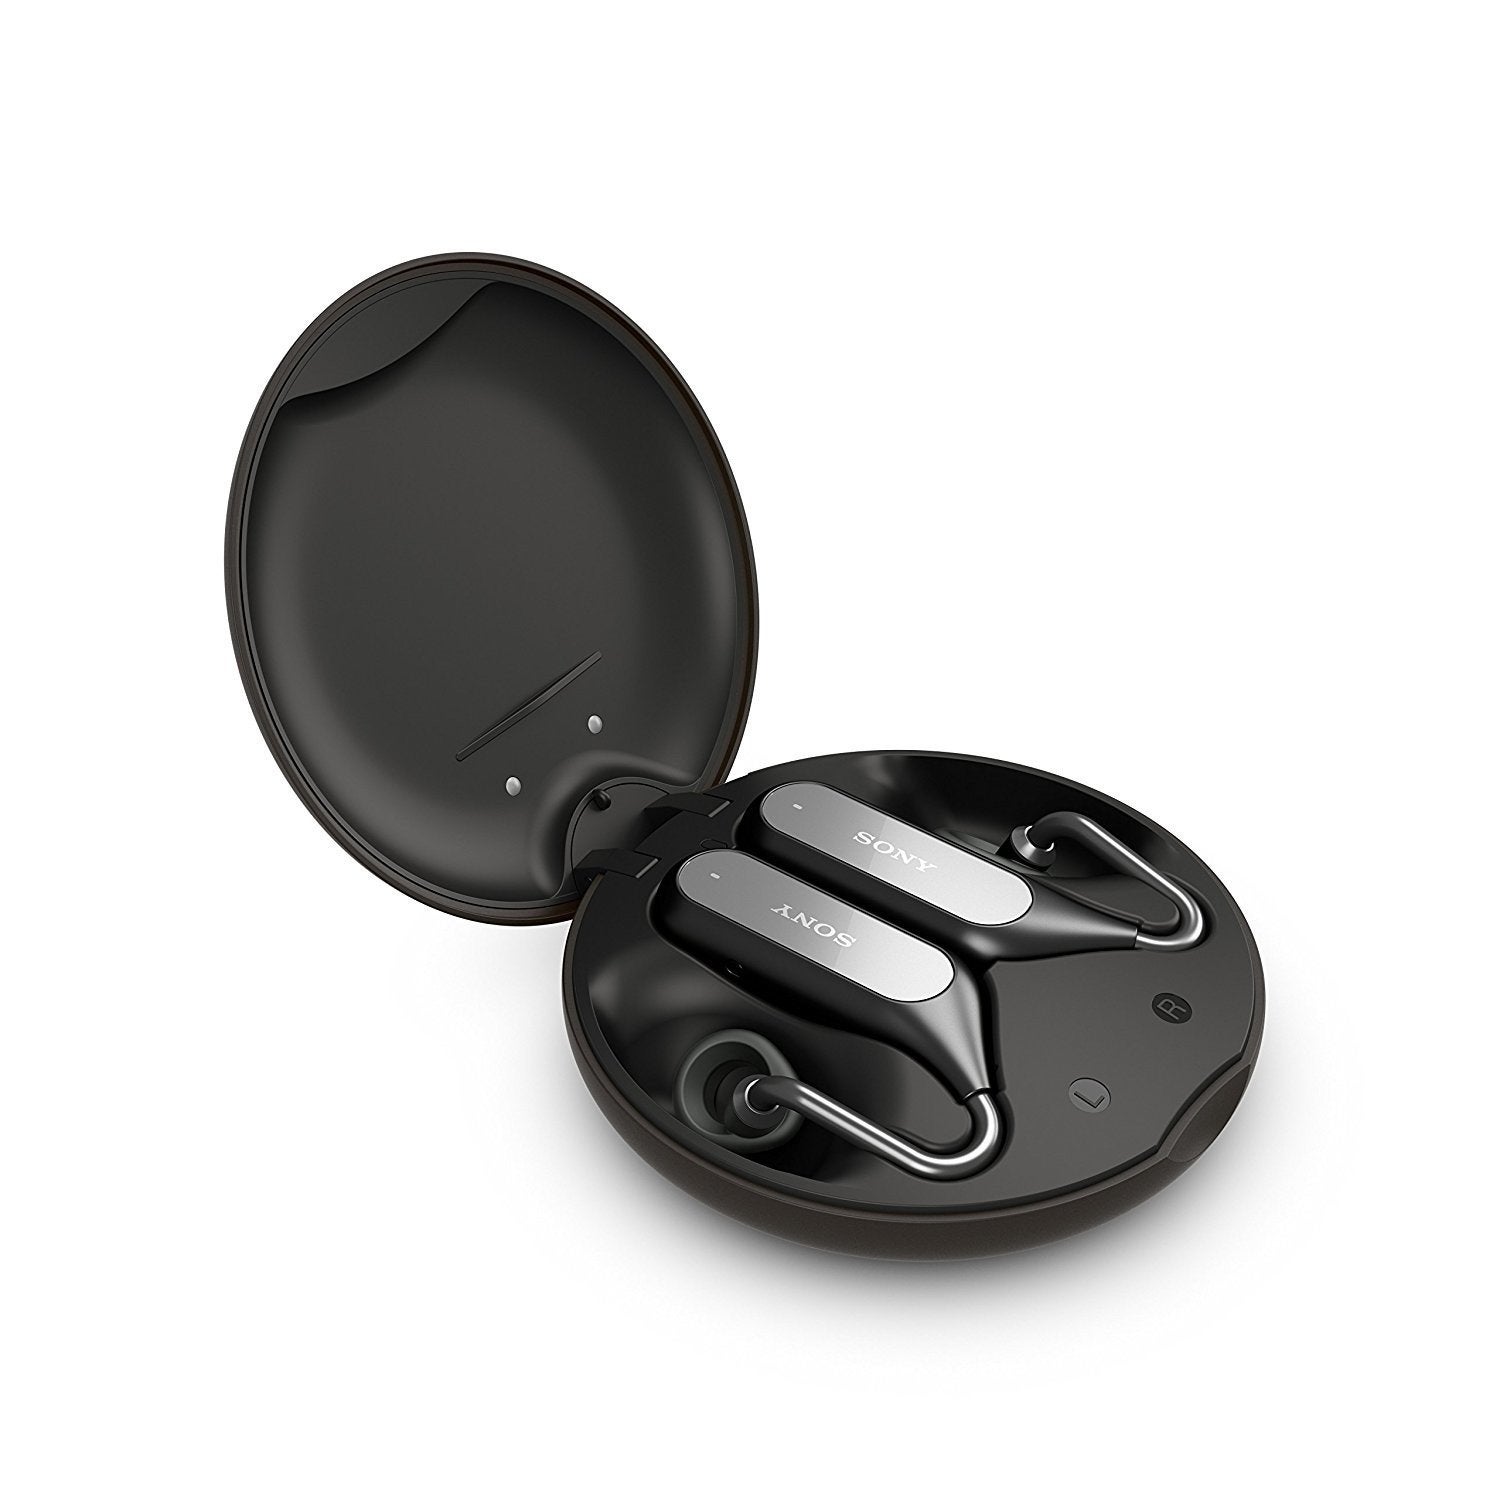 Sony's revolutionary Xperia Ear Duo earbuds coming to the US on May 25, pre-orders open